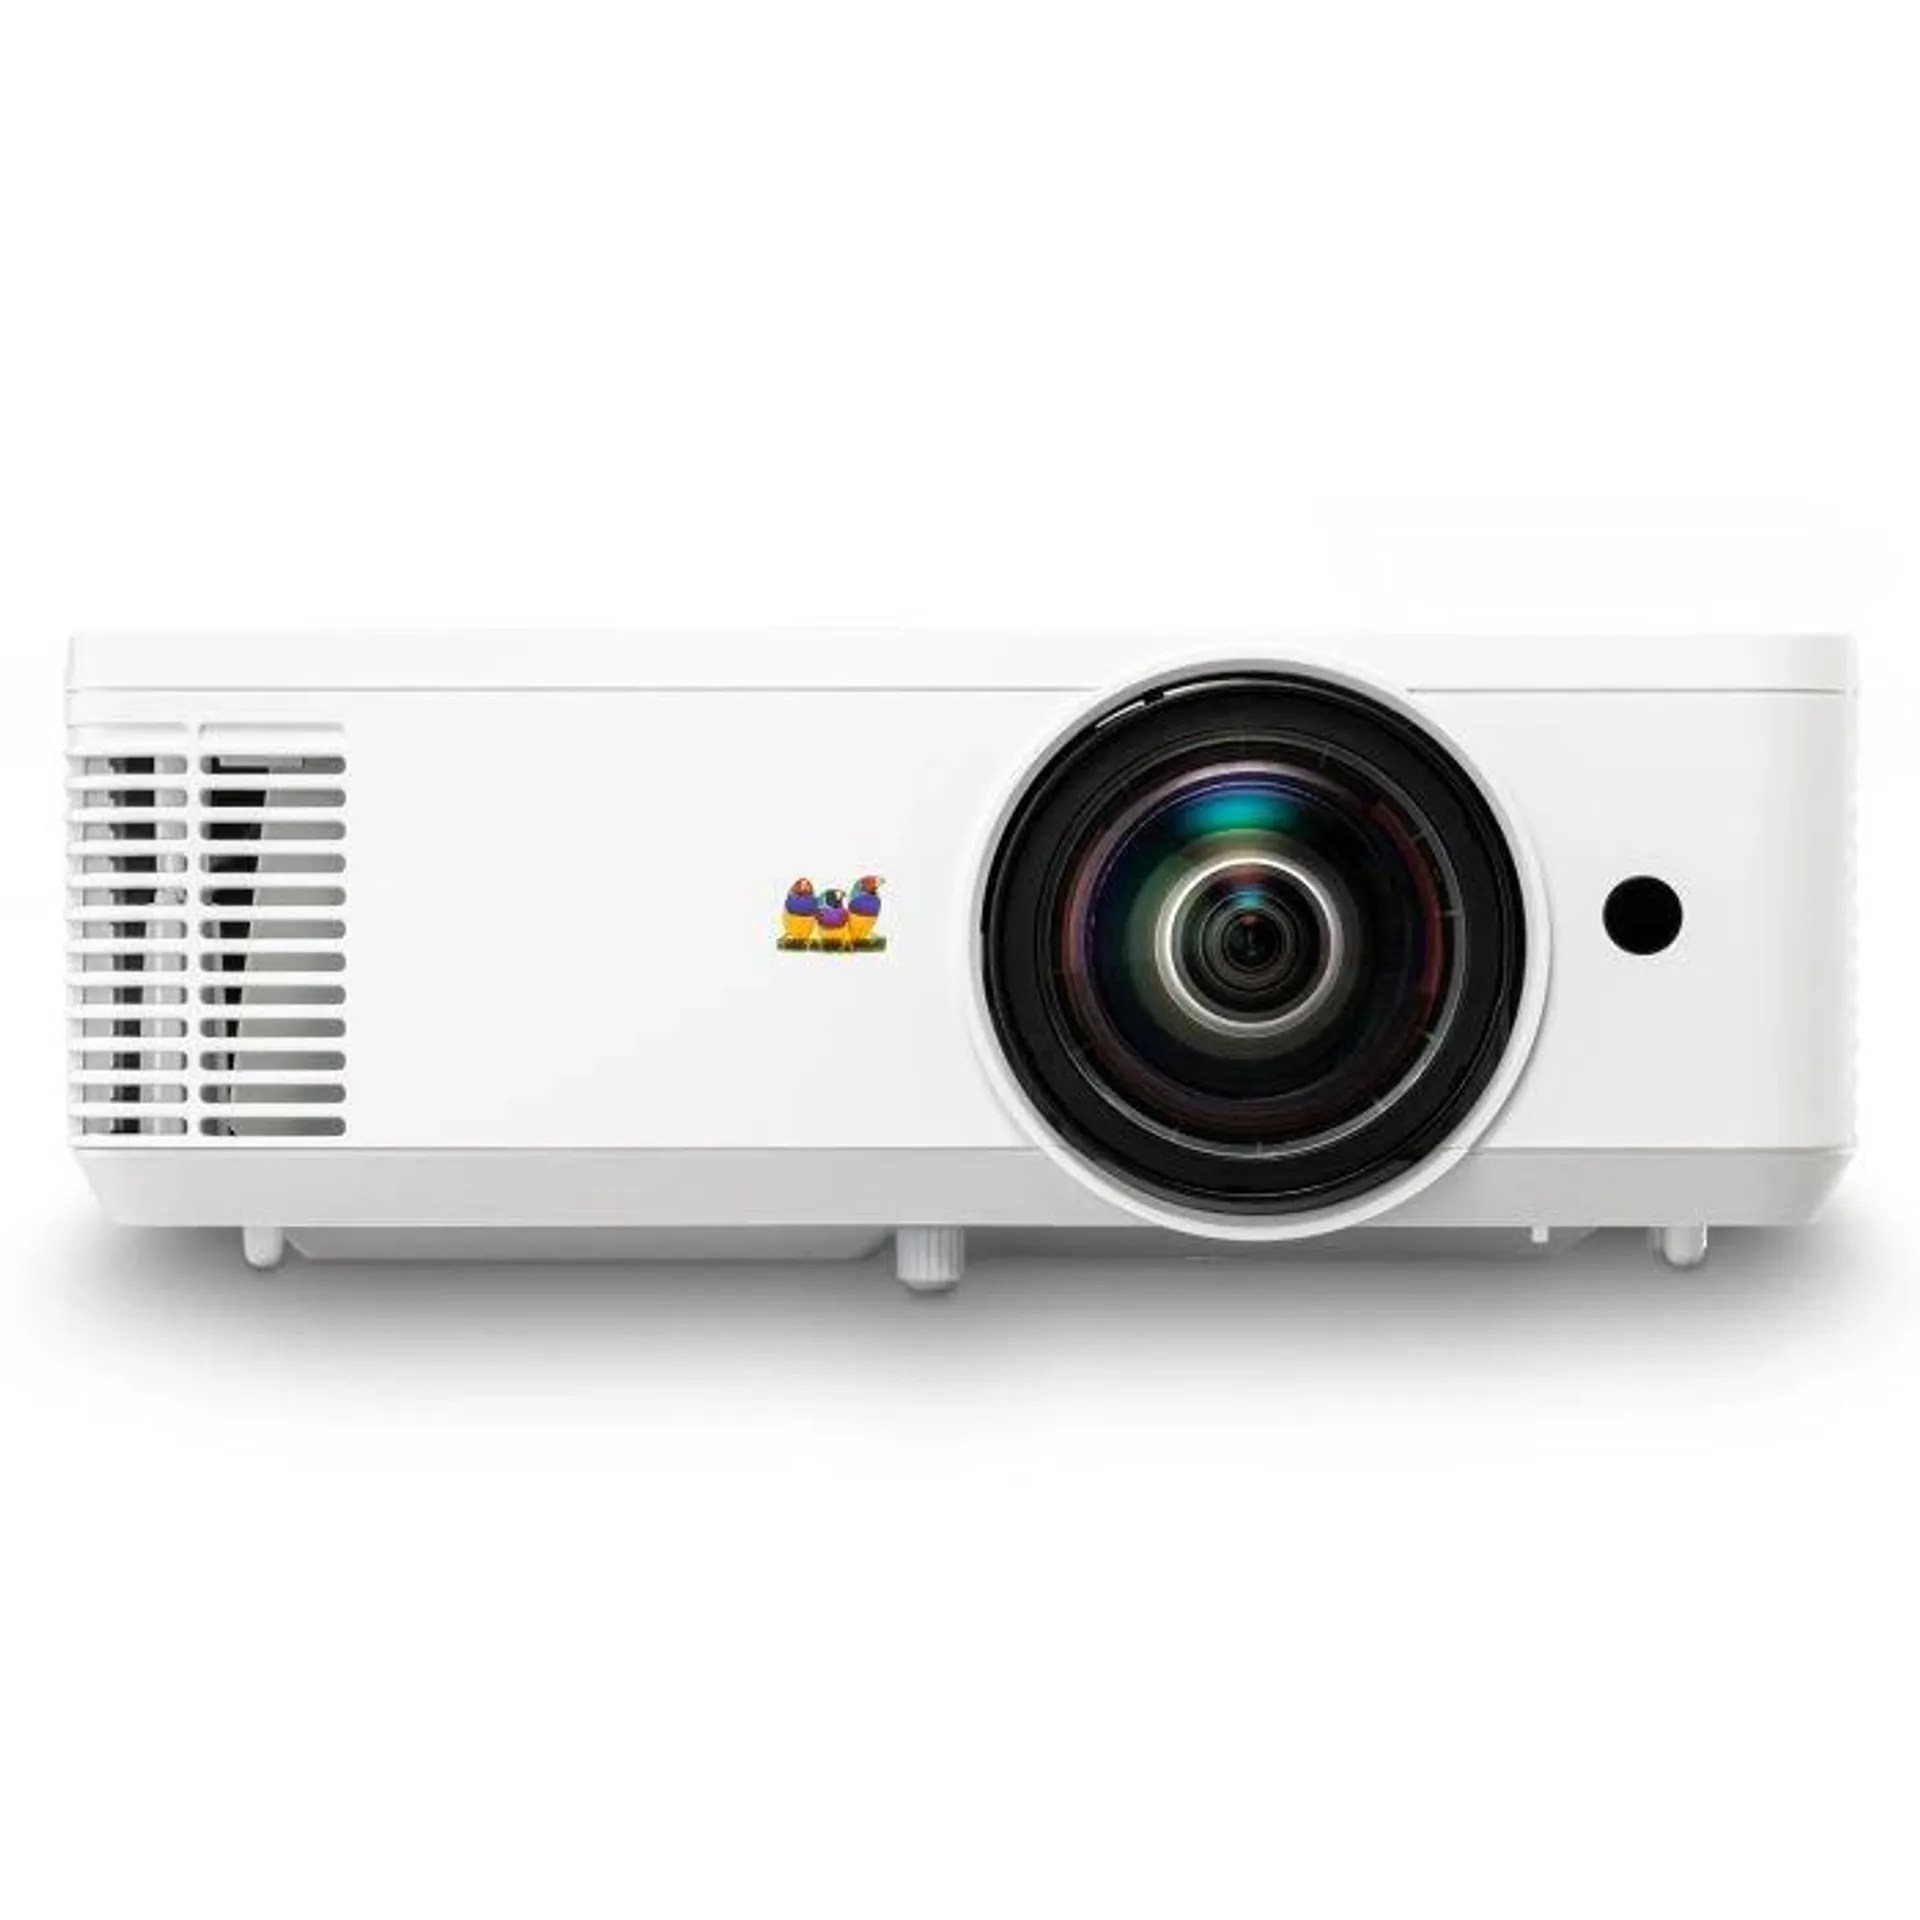 PS502X - 4,000 Lumen Business and Education Projector